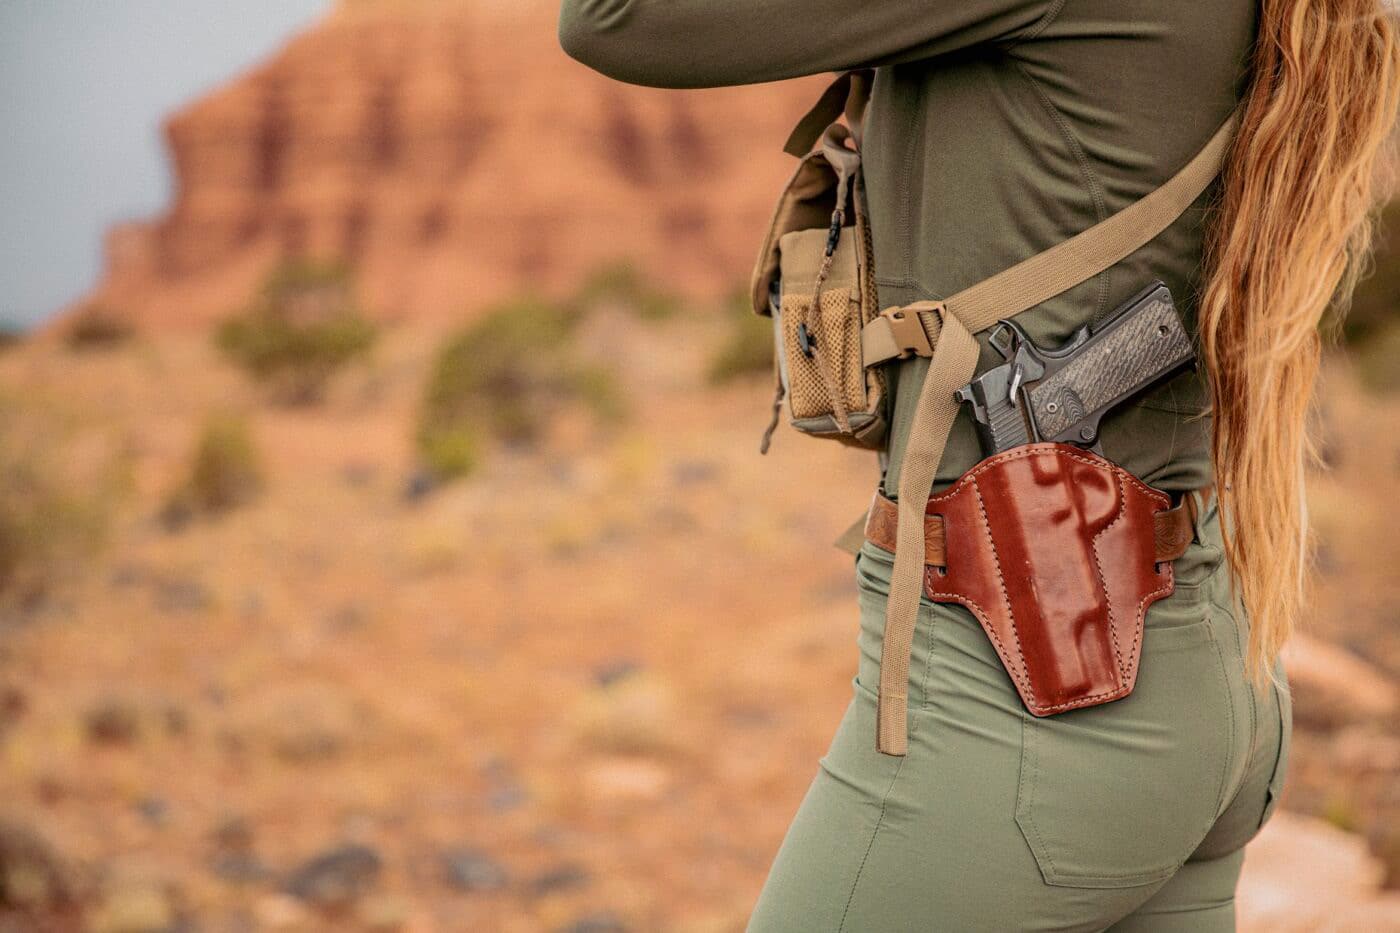 Woman hunting while carrying a 1911 pistol in a Bianchi Remedy holster